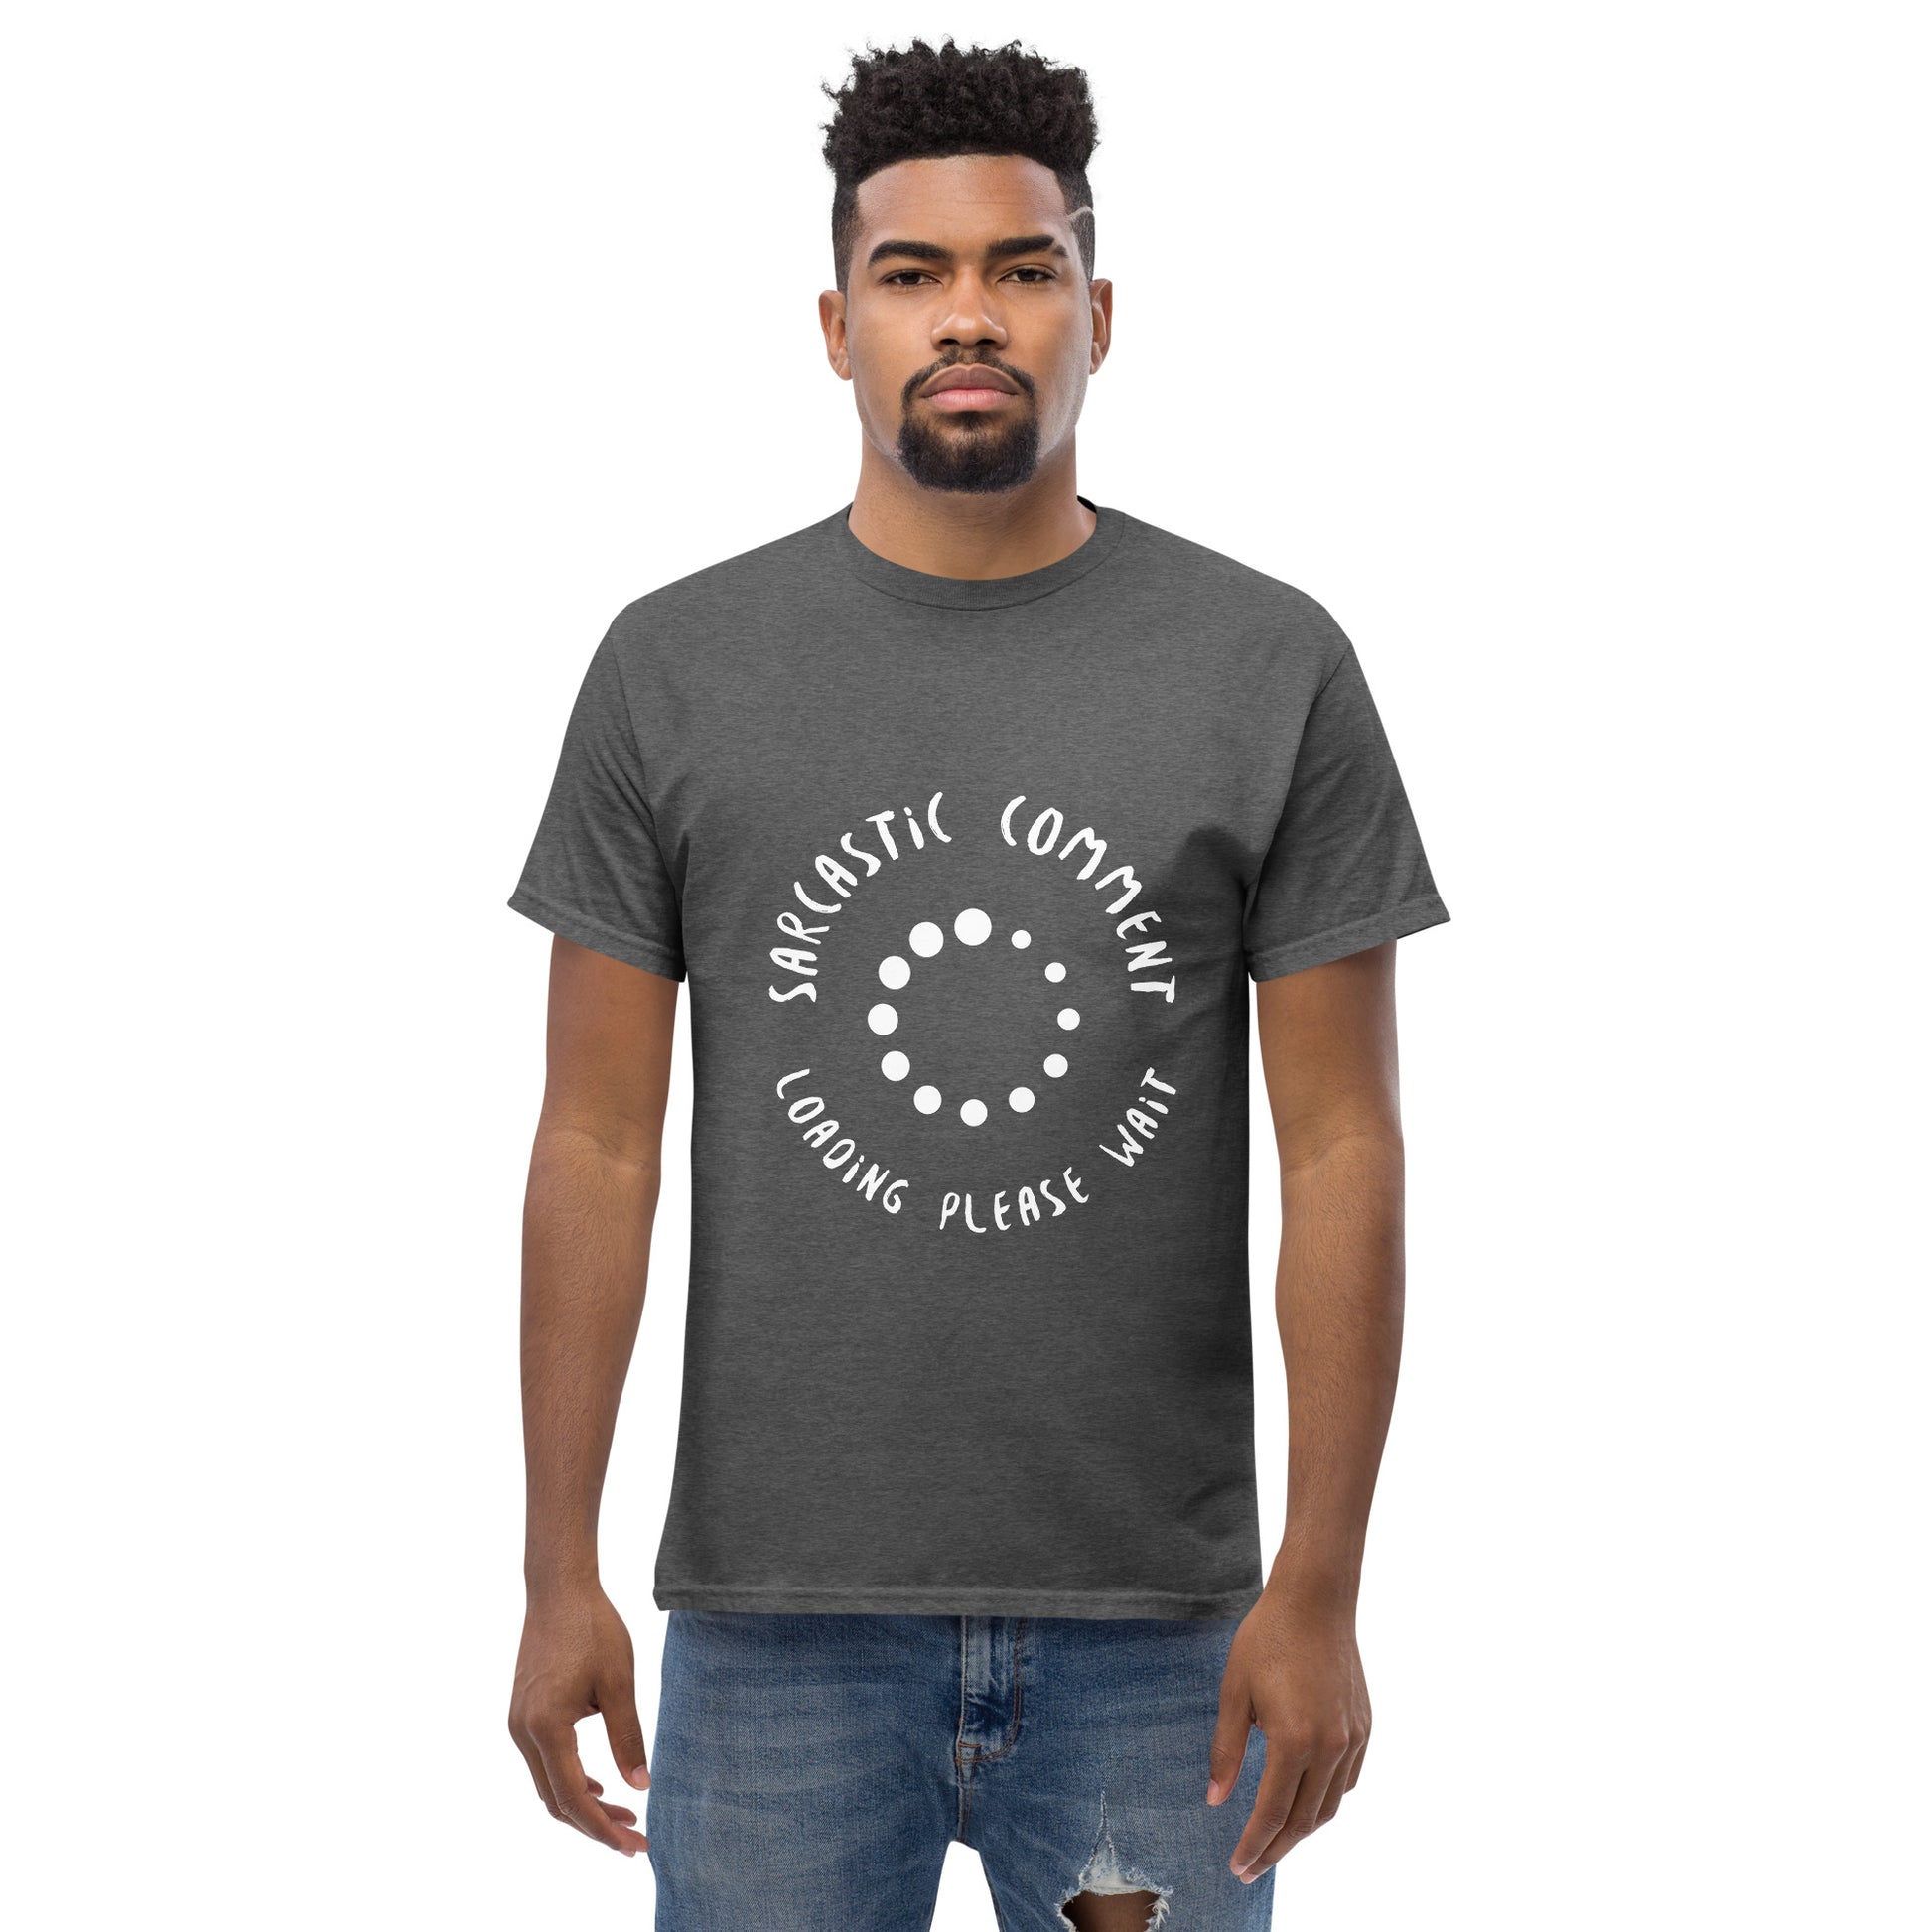 Men with Dark heather T-shirt with the text in a circle "Sarcastic comment loading please wait"